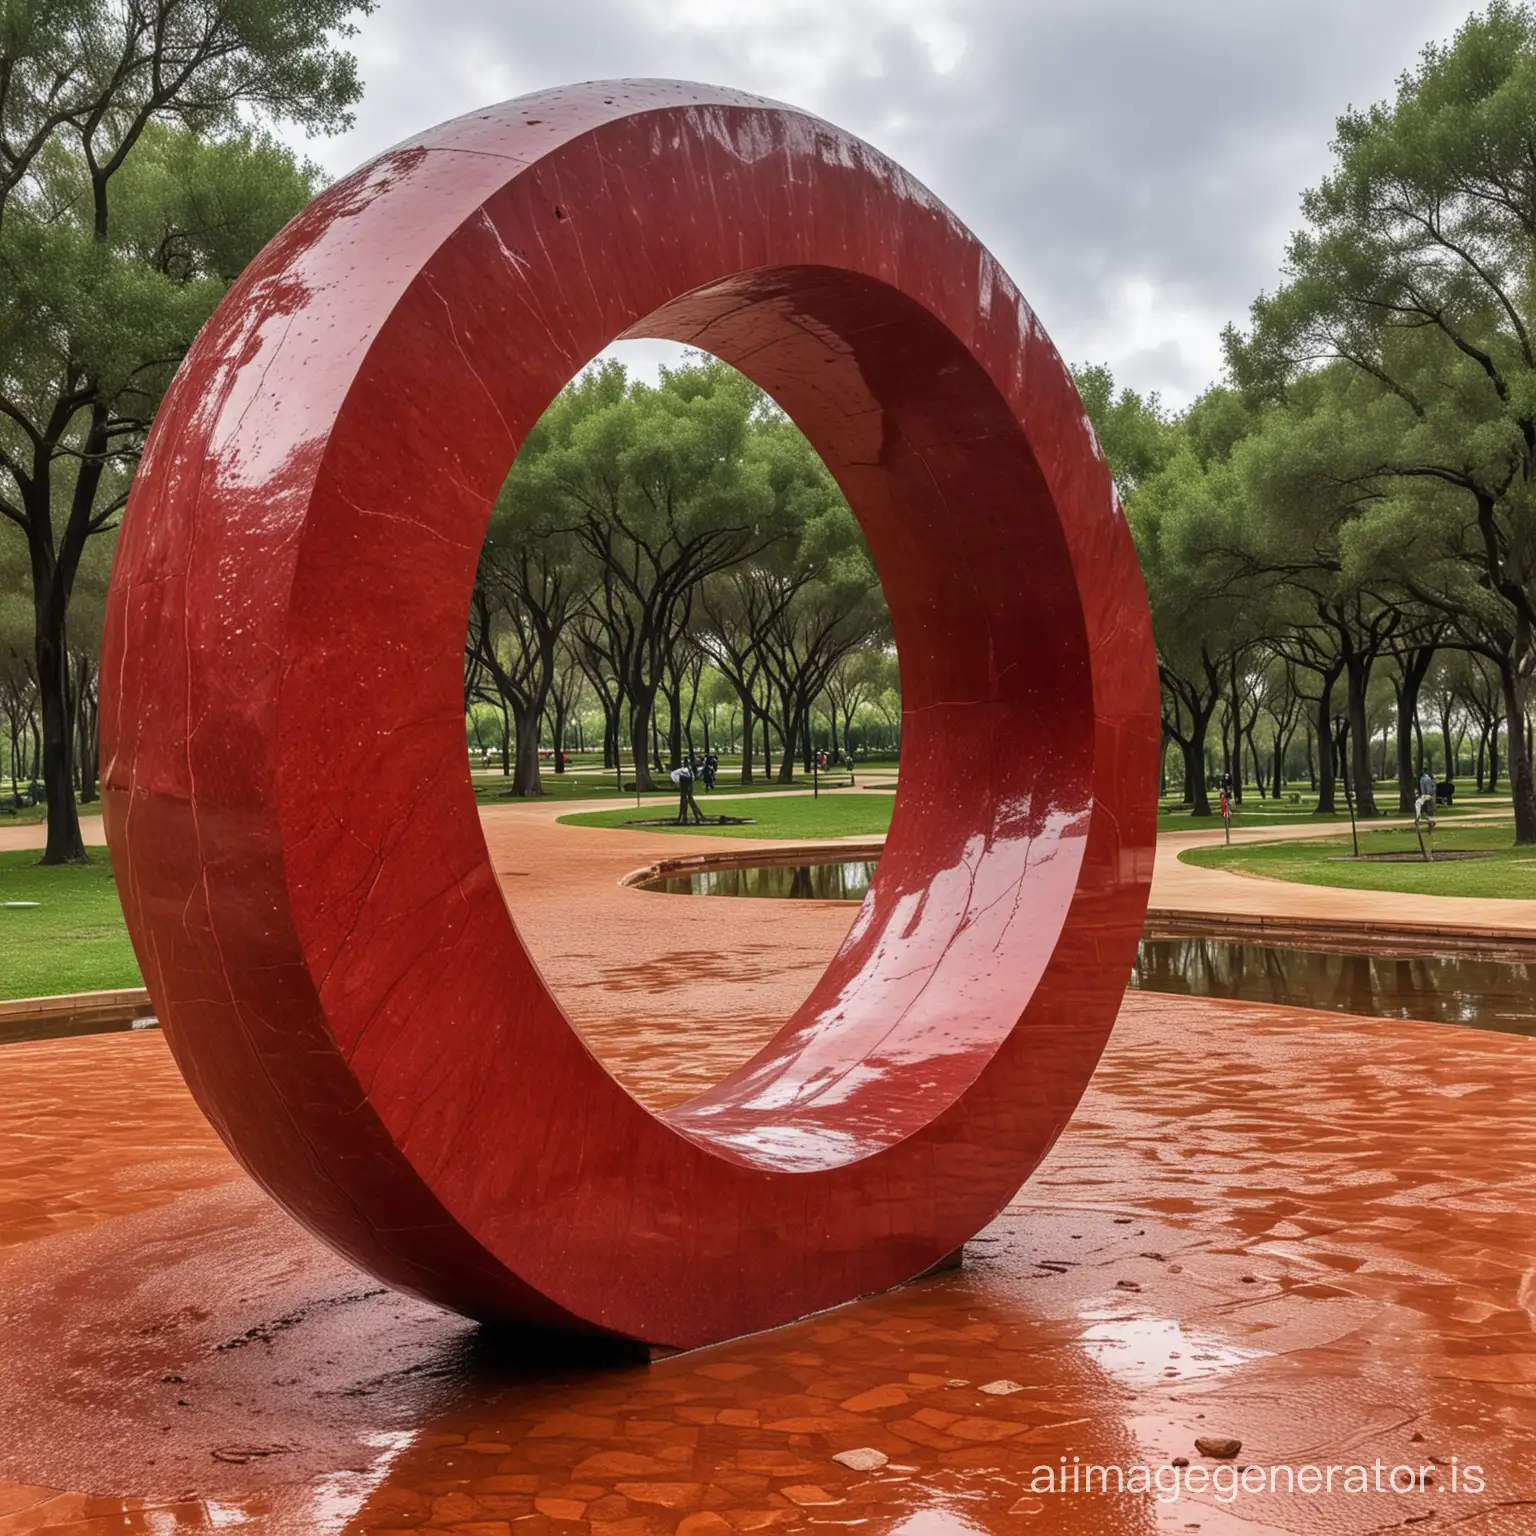 a very big oval sculpture mad of shiny red stone in the middle of a park in Spain after rain and sunrise